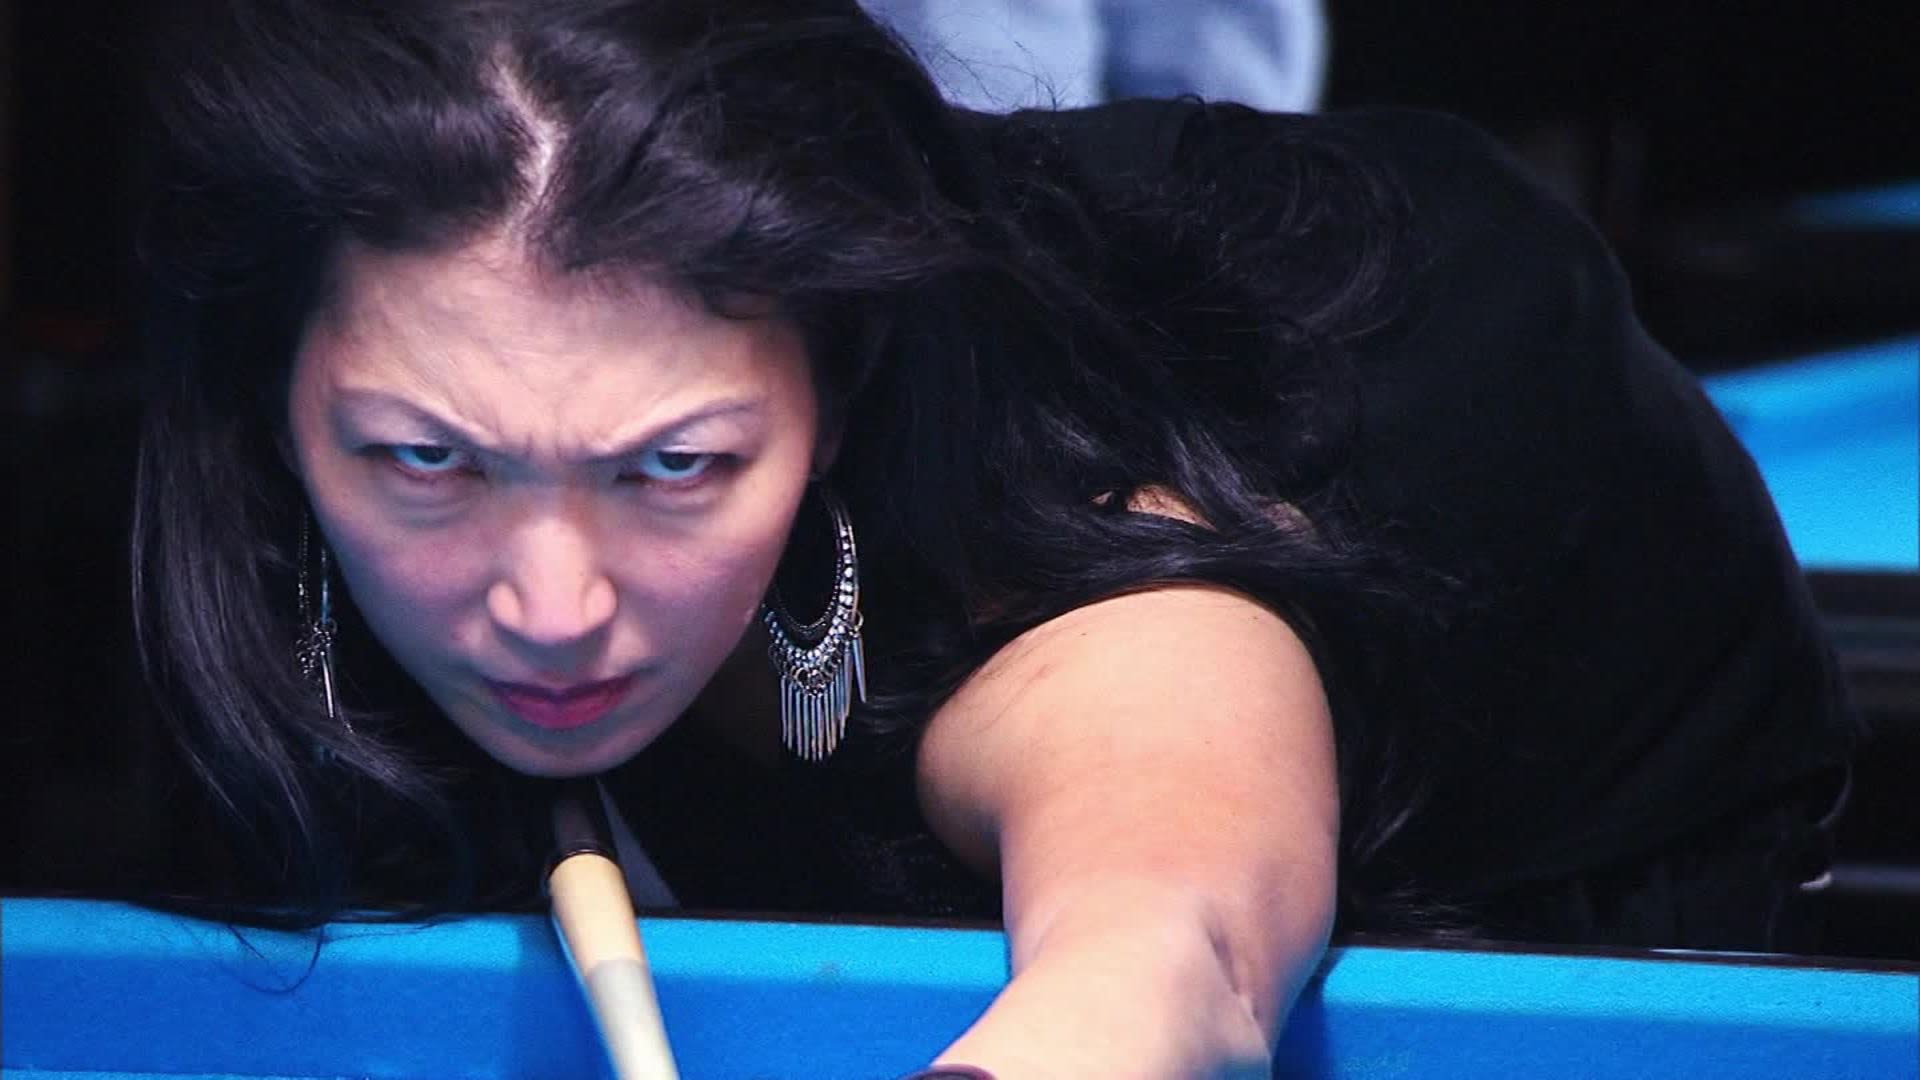 Jeannette Lee, champion pool player, turns pain into power | CNN